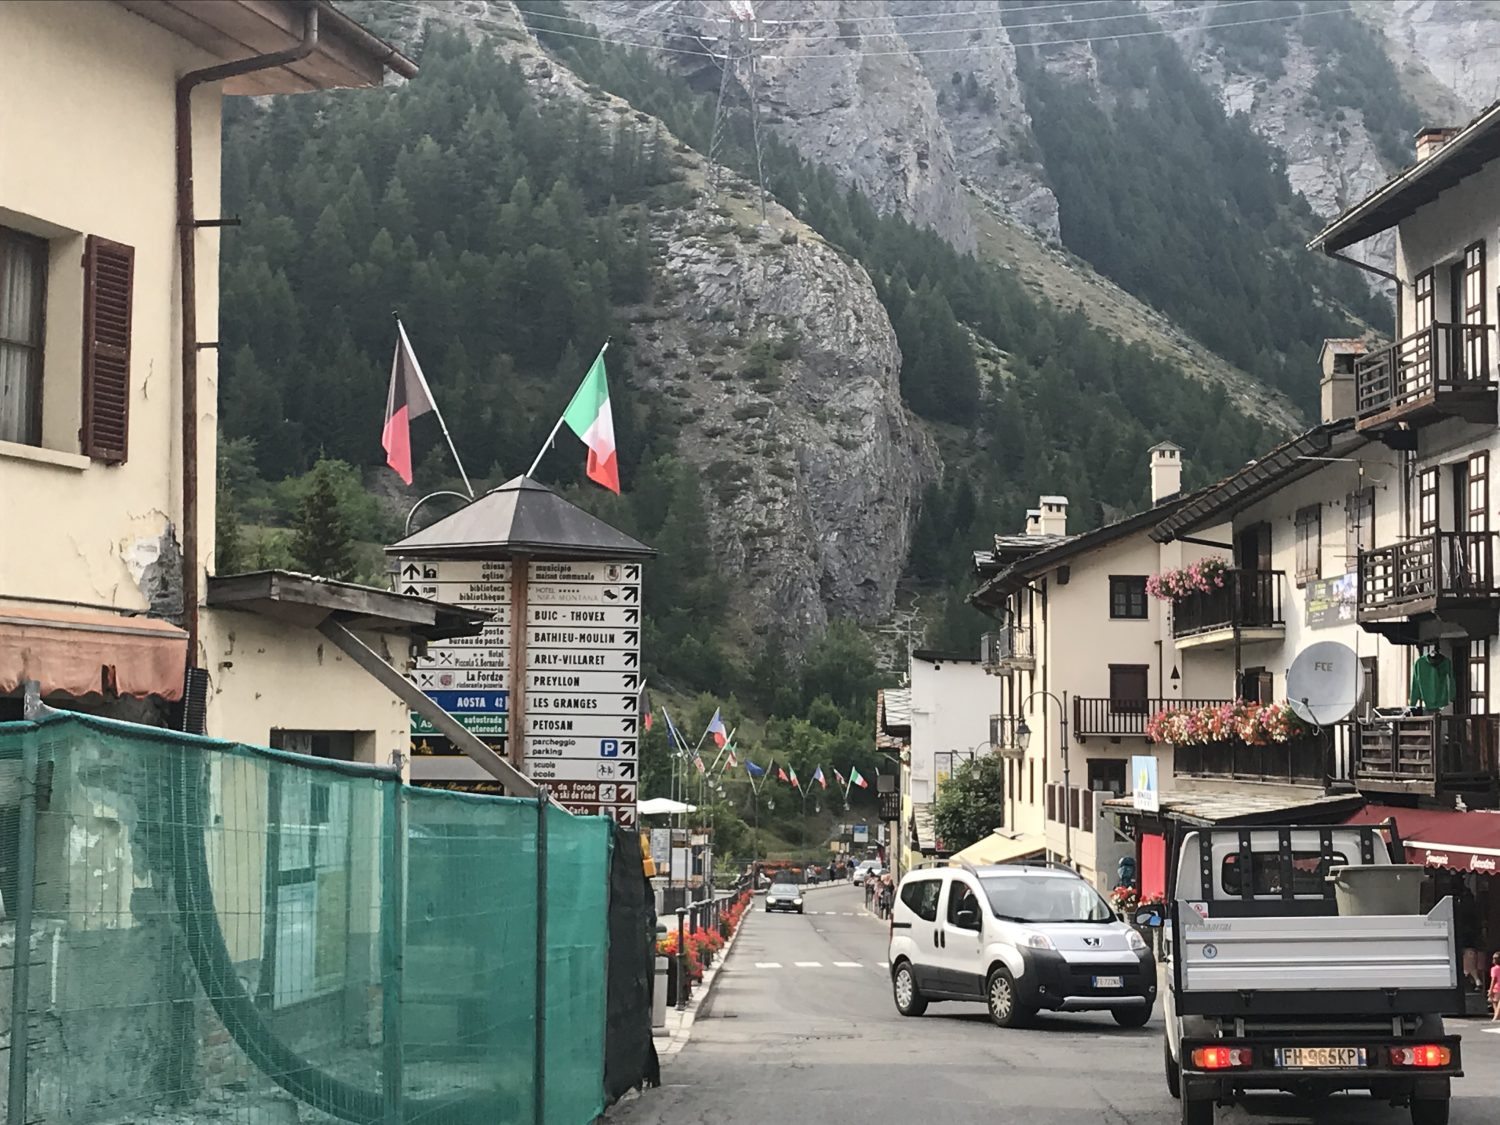 The quirky town of La Thuile. Our Route des Grandes Alpes to cross from France into Italy.